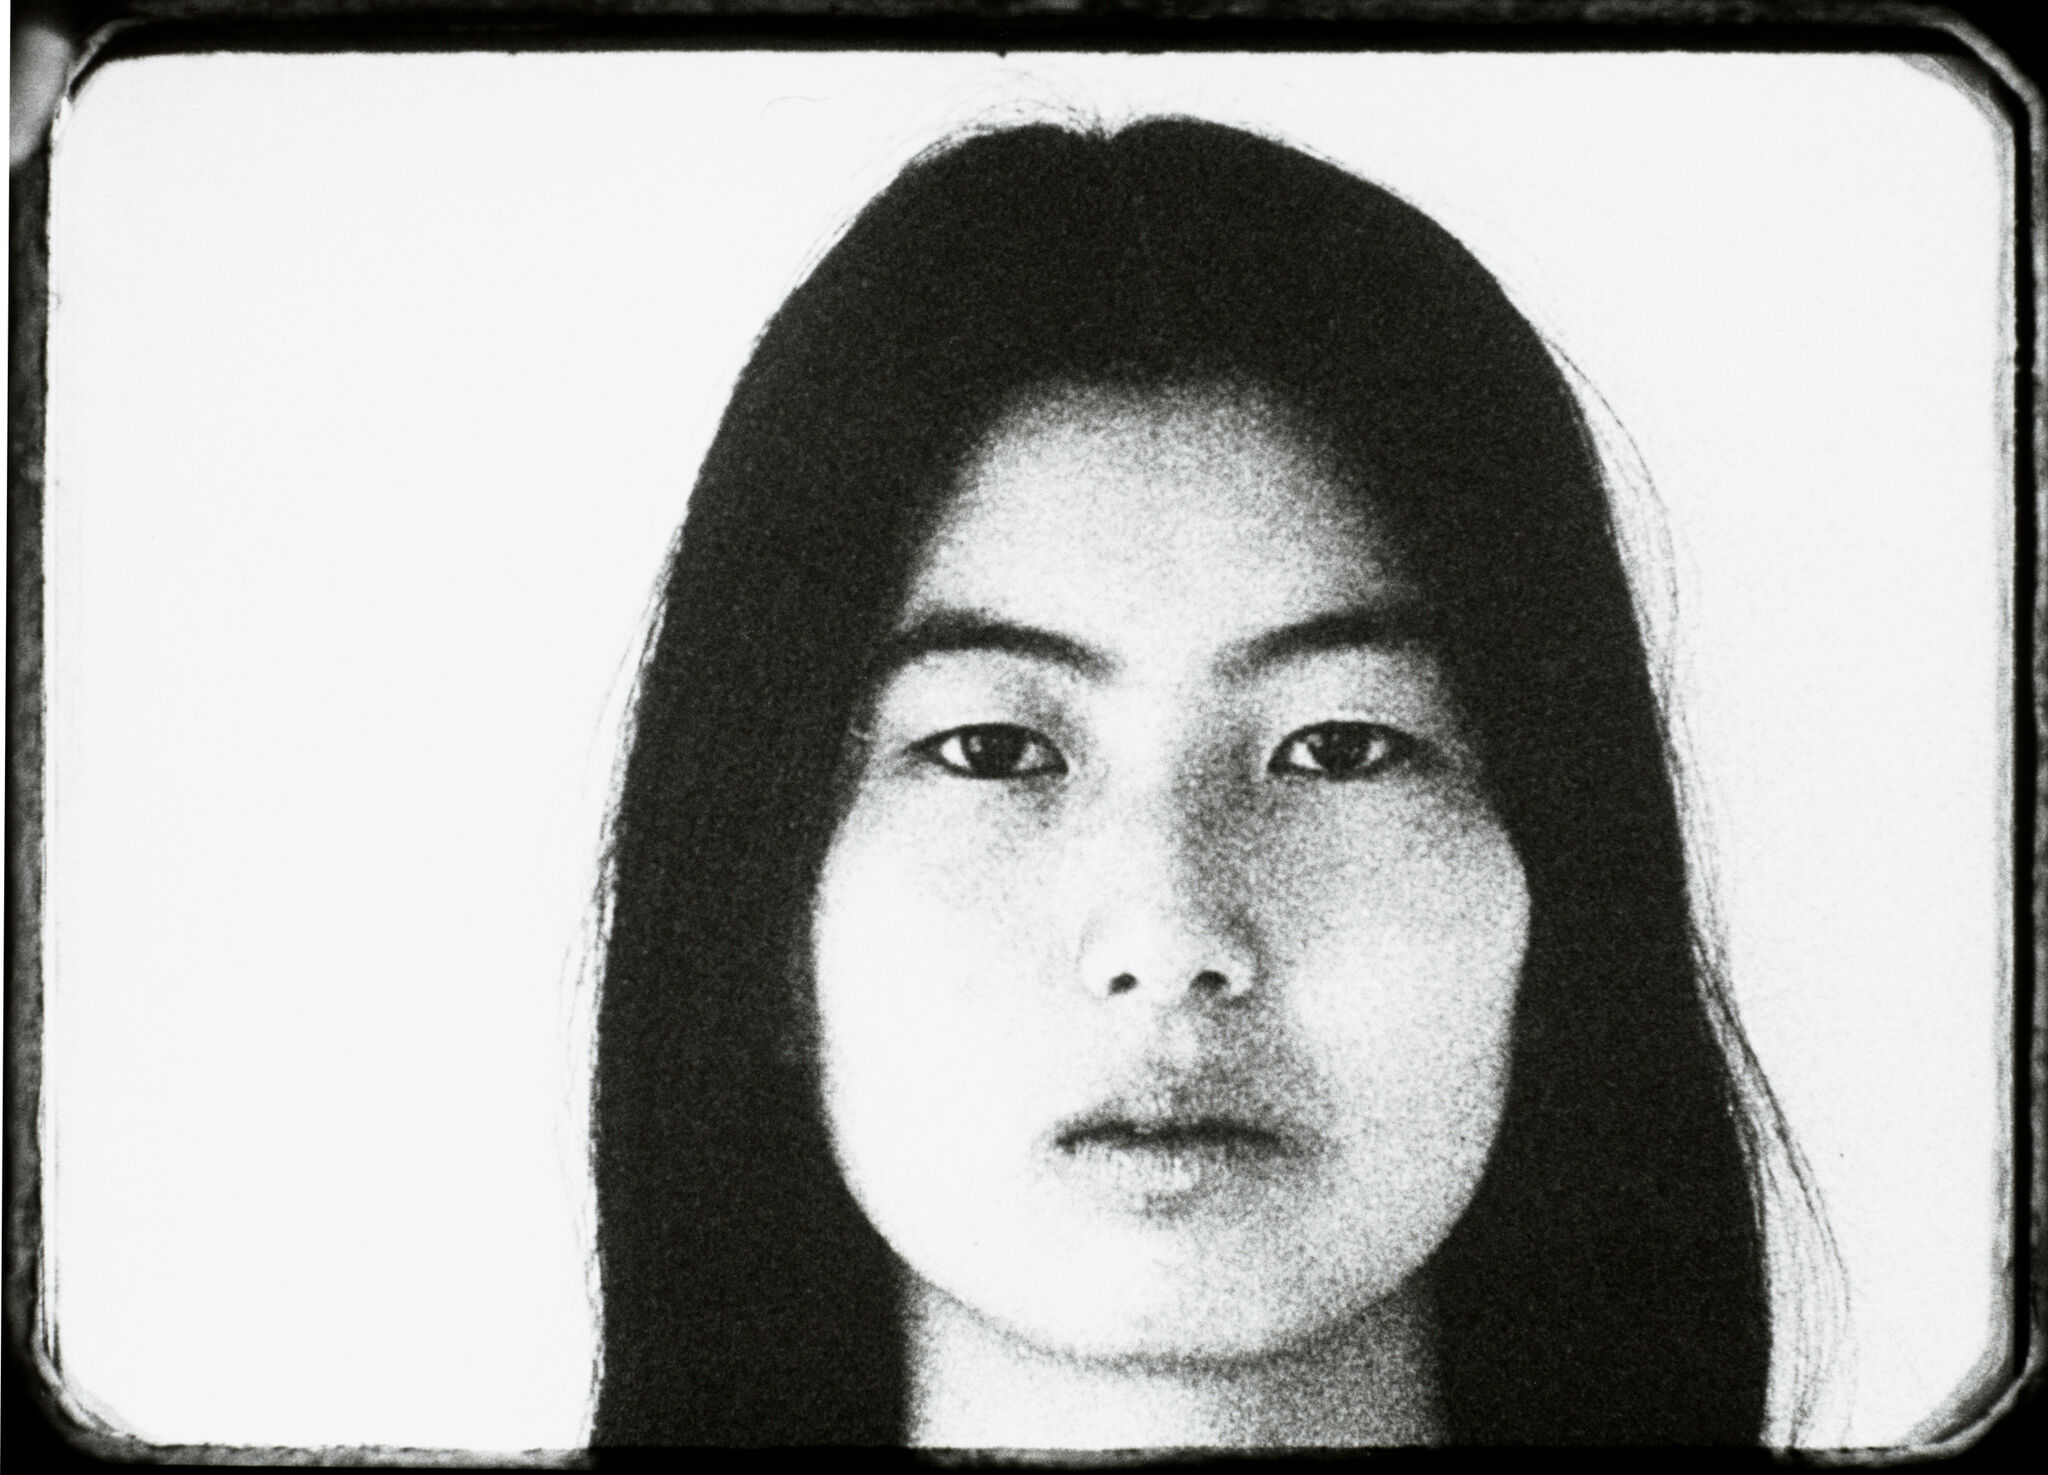 Black-and-white image of a female face, staring directly at the camera with her lips slightly parted.